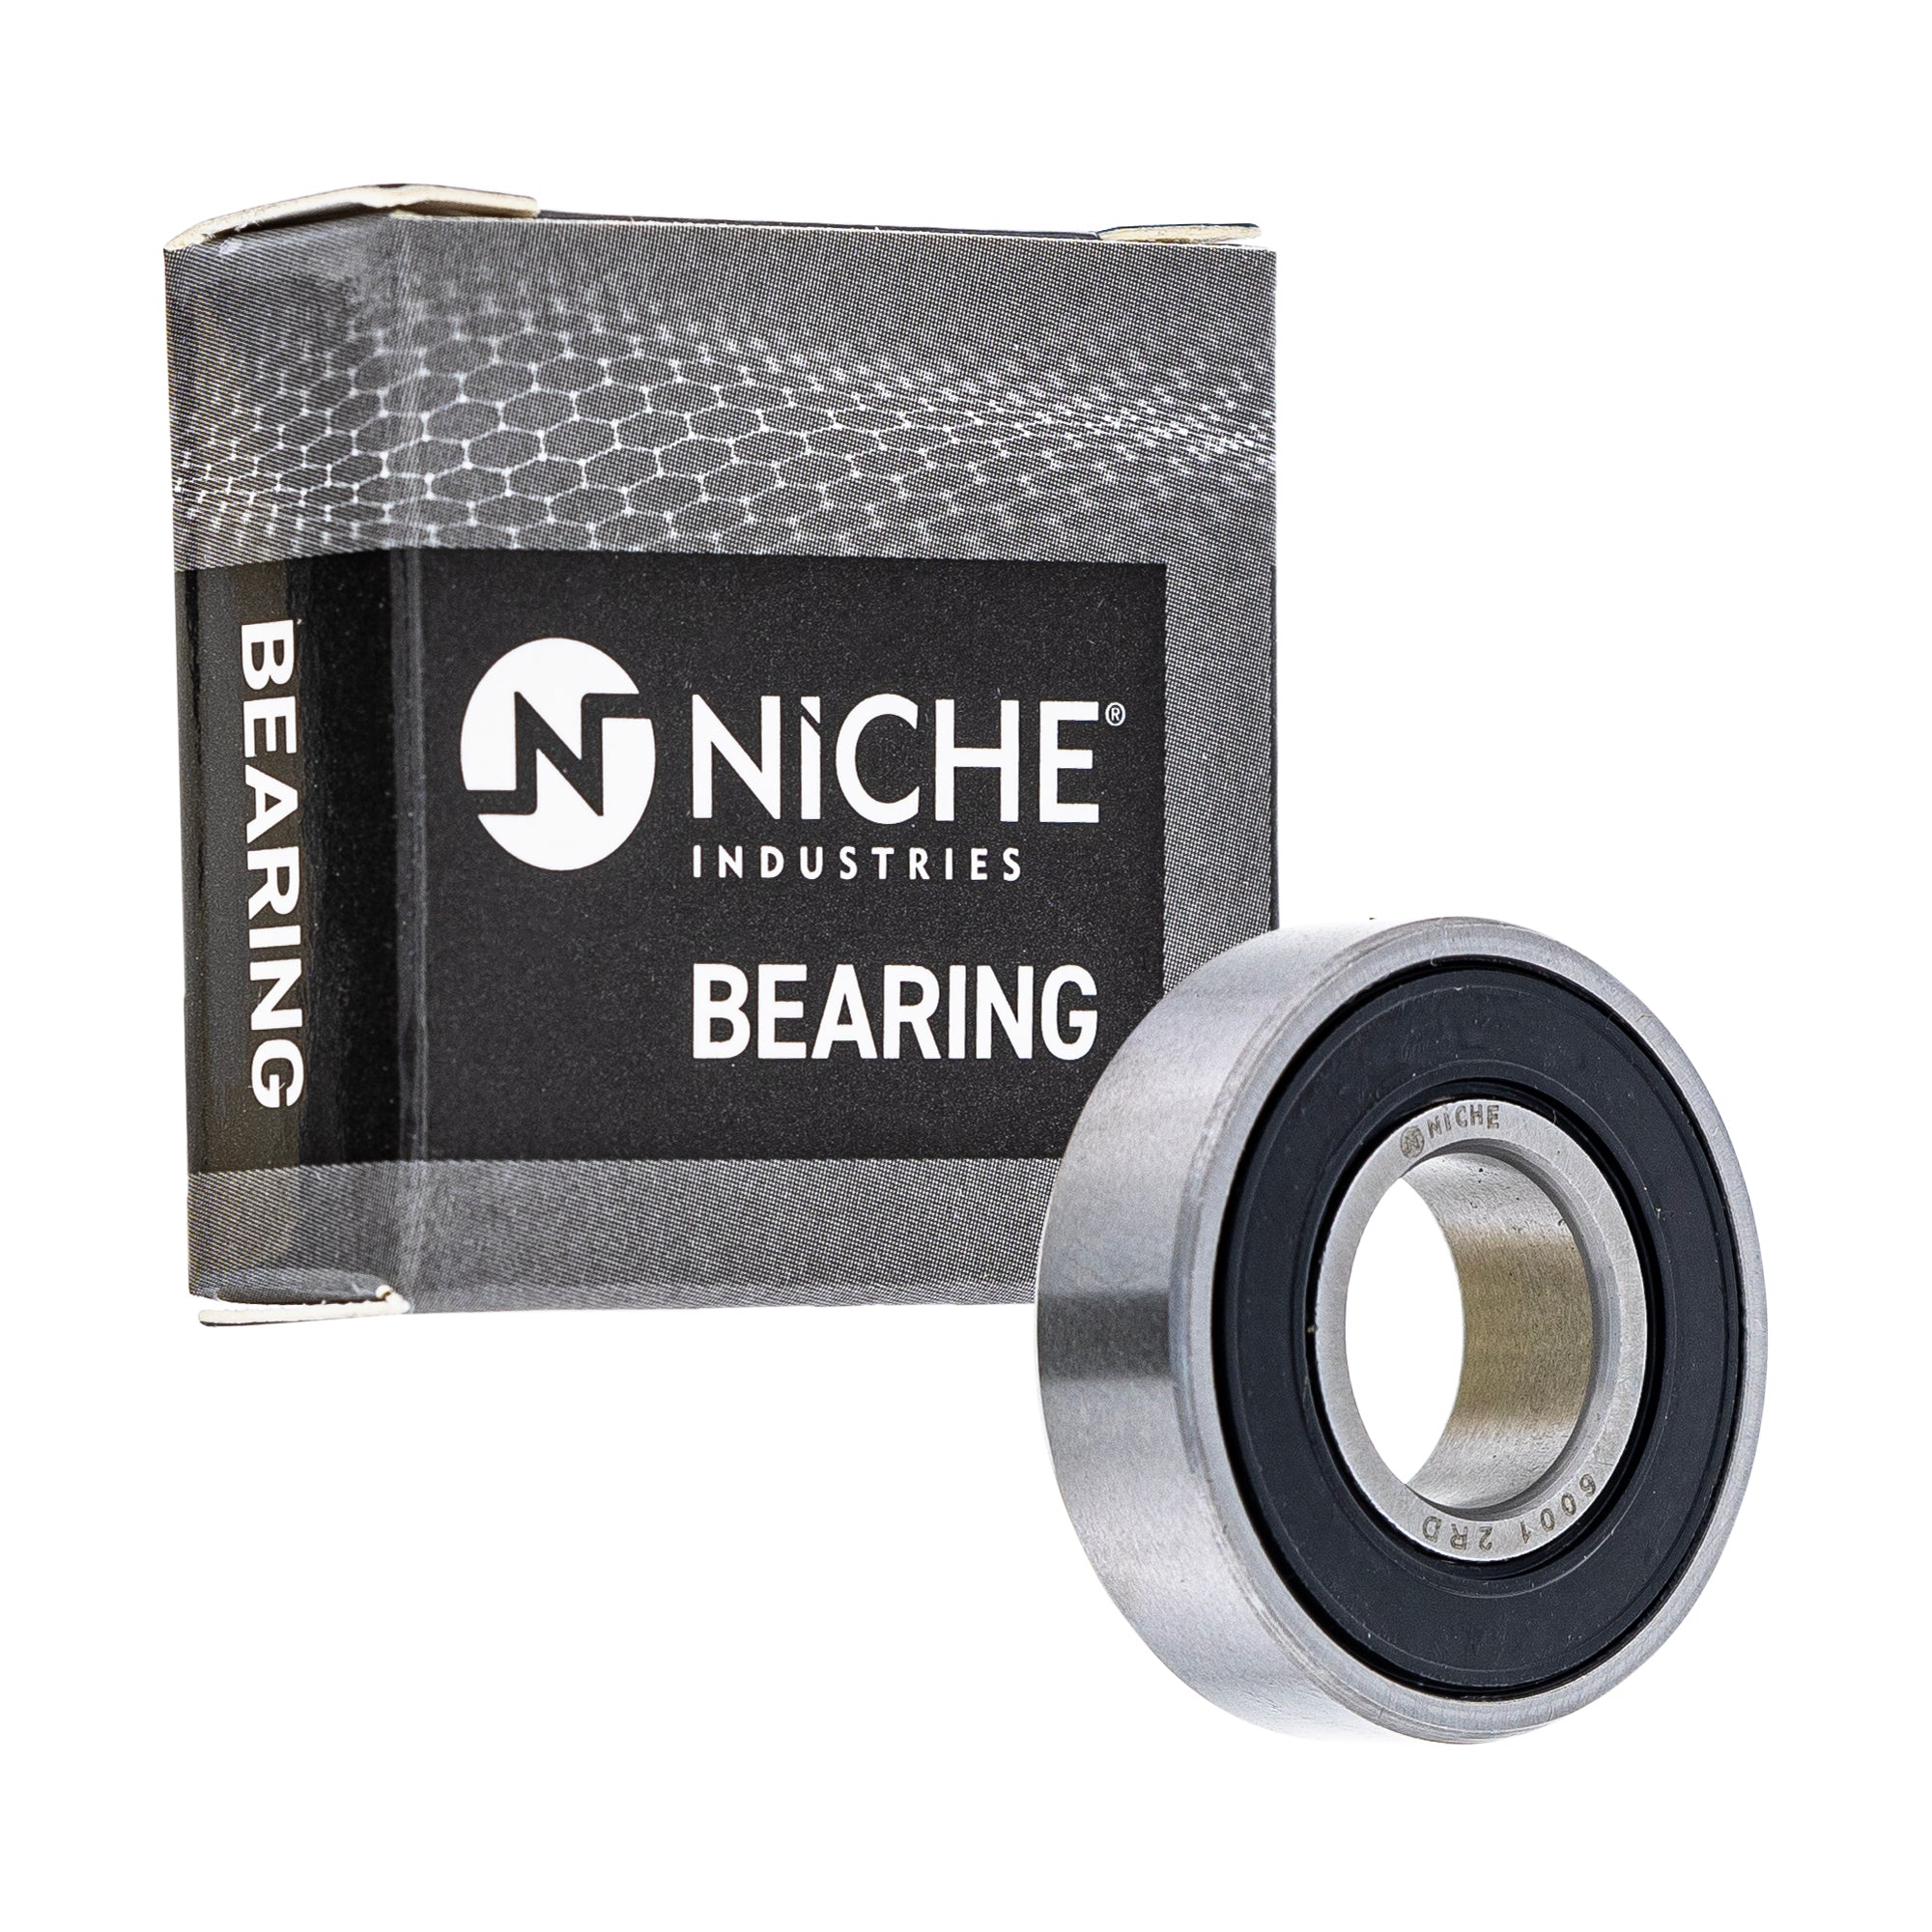 NICHE 519-CBB2333R Bearing & Seal Kit 2-Pack for zOTHER YZ80